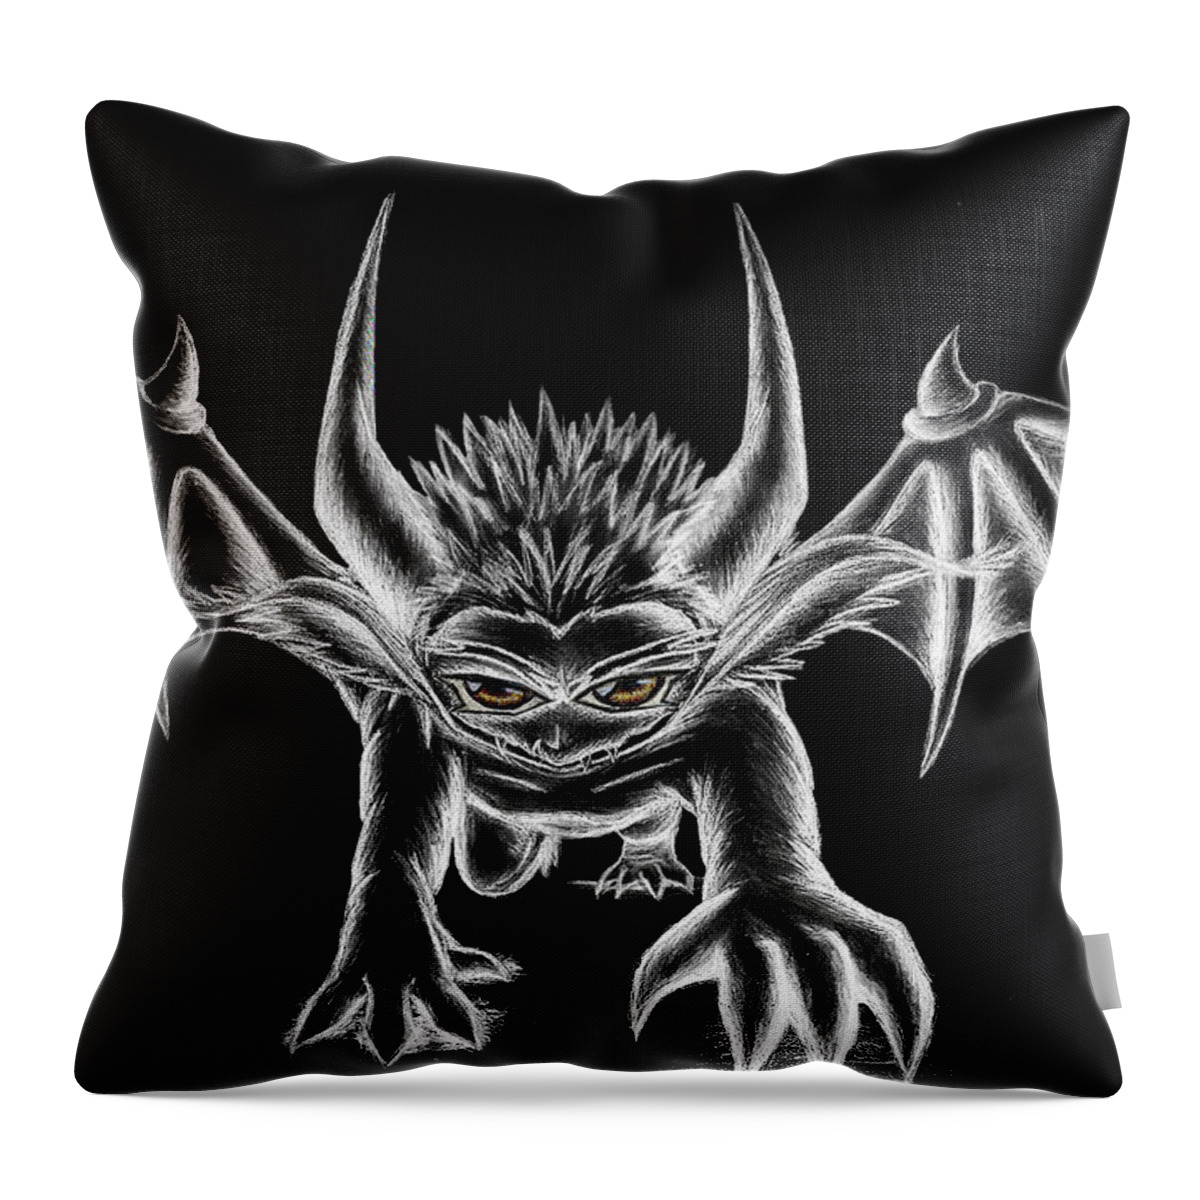 Demon Throw Pillow featuring the painting Grevil Chalk by Shawn Dall